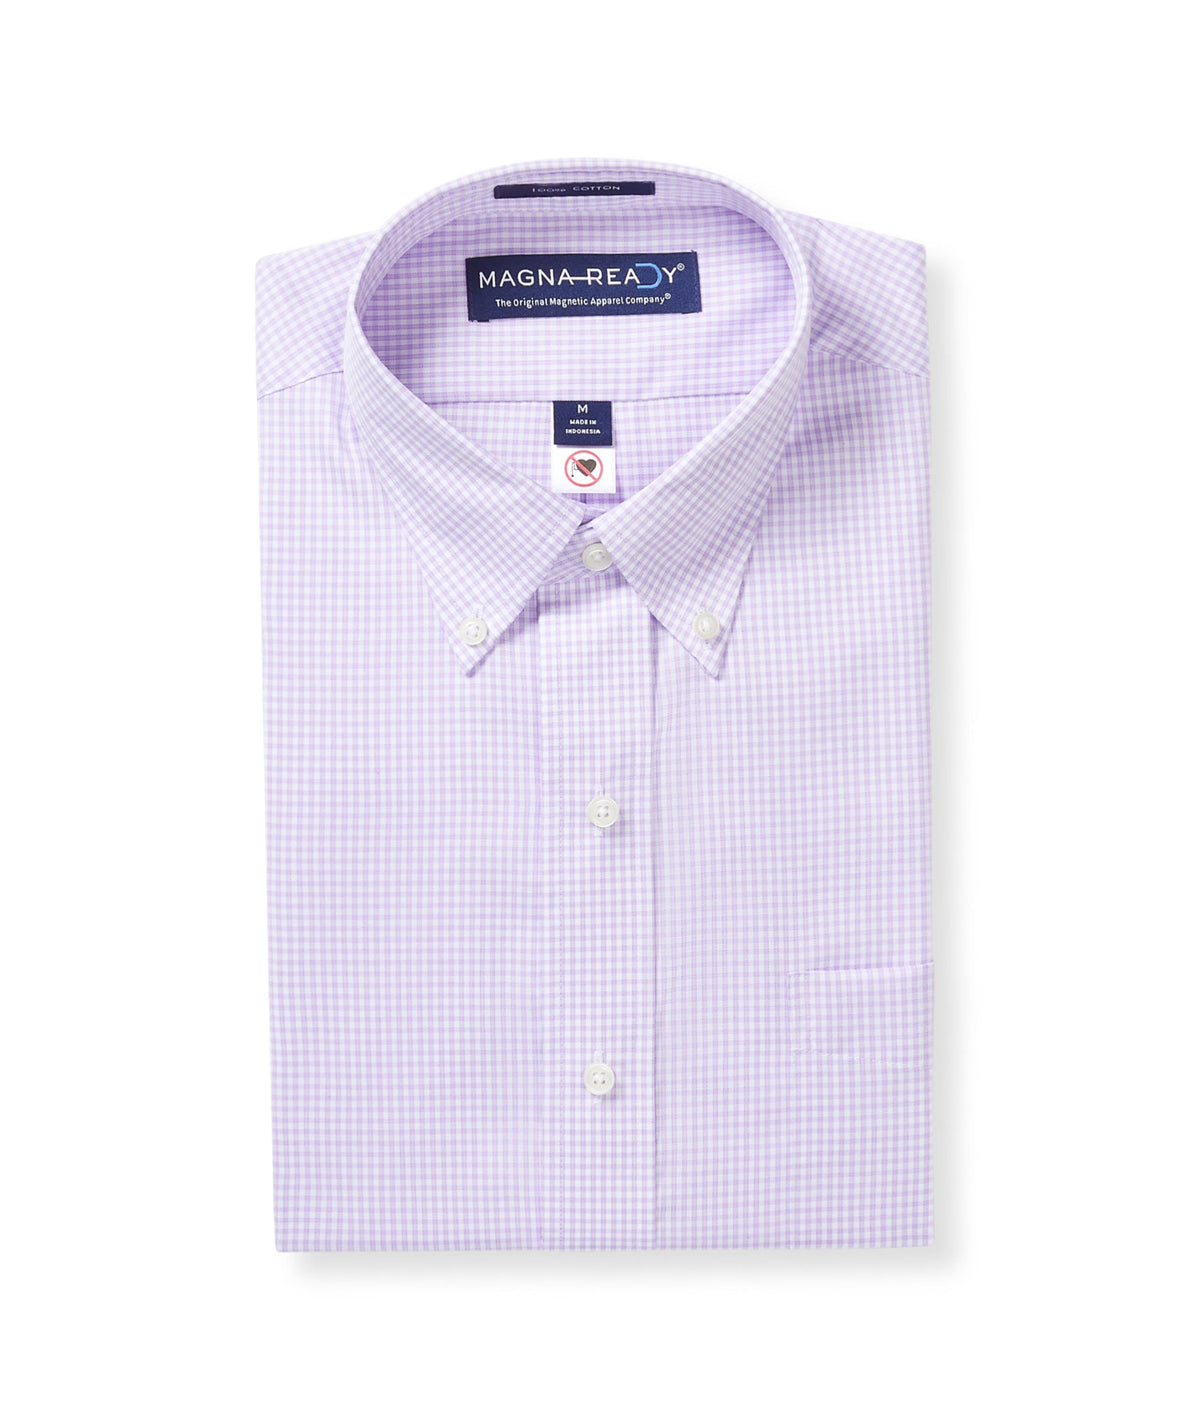 Long Sleeve Lilac and White Micro Plaid Button Down Shirt With Magnetic Buttons